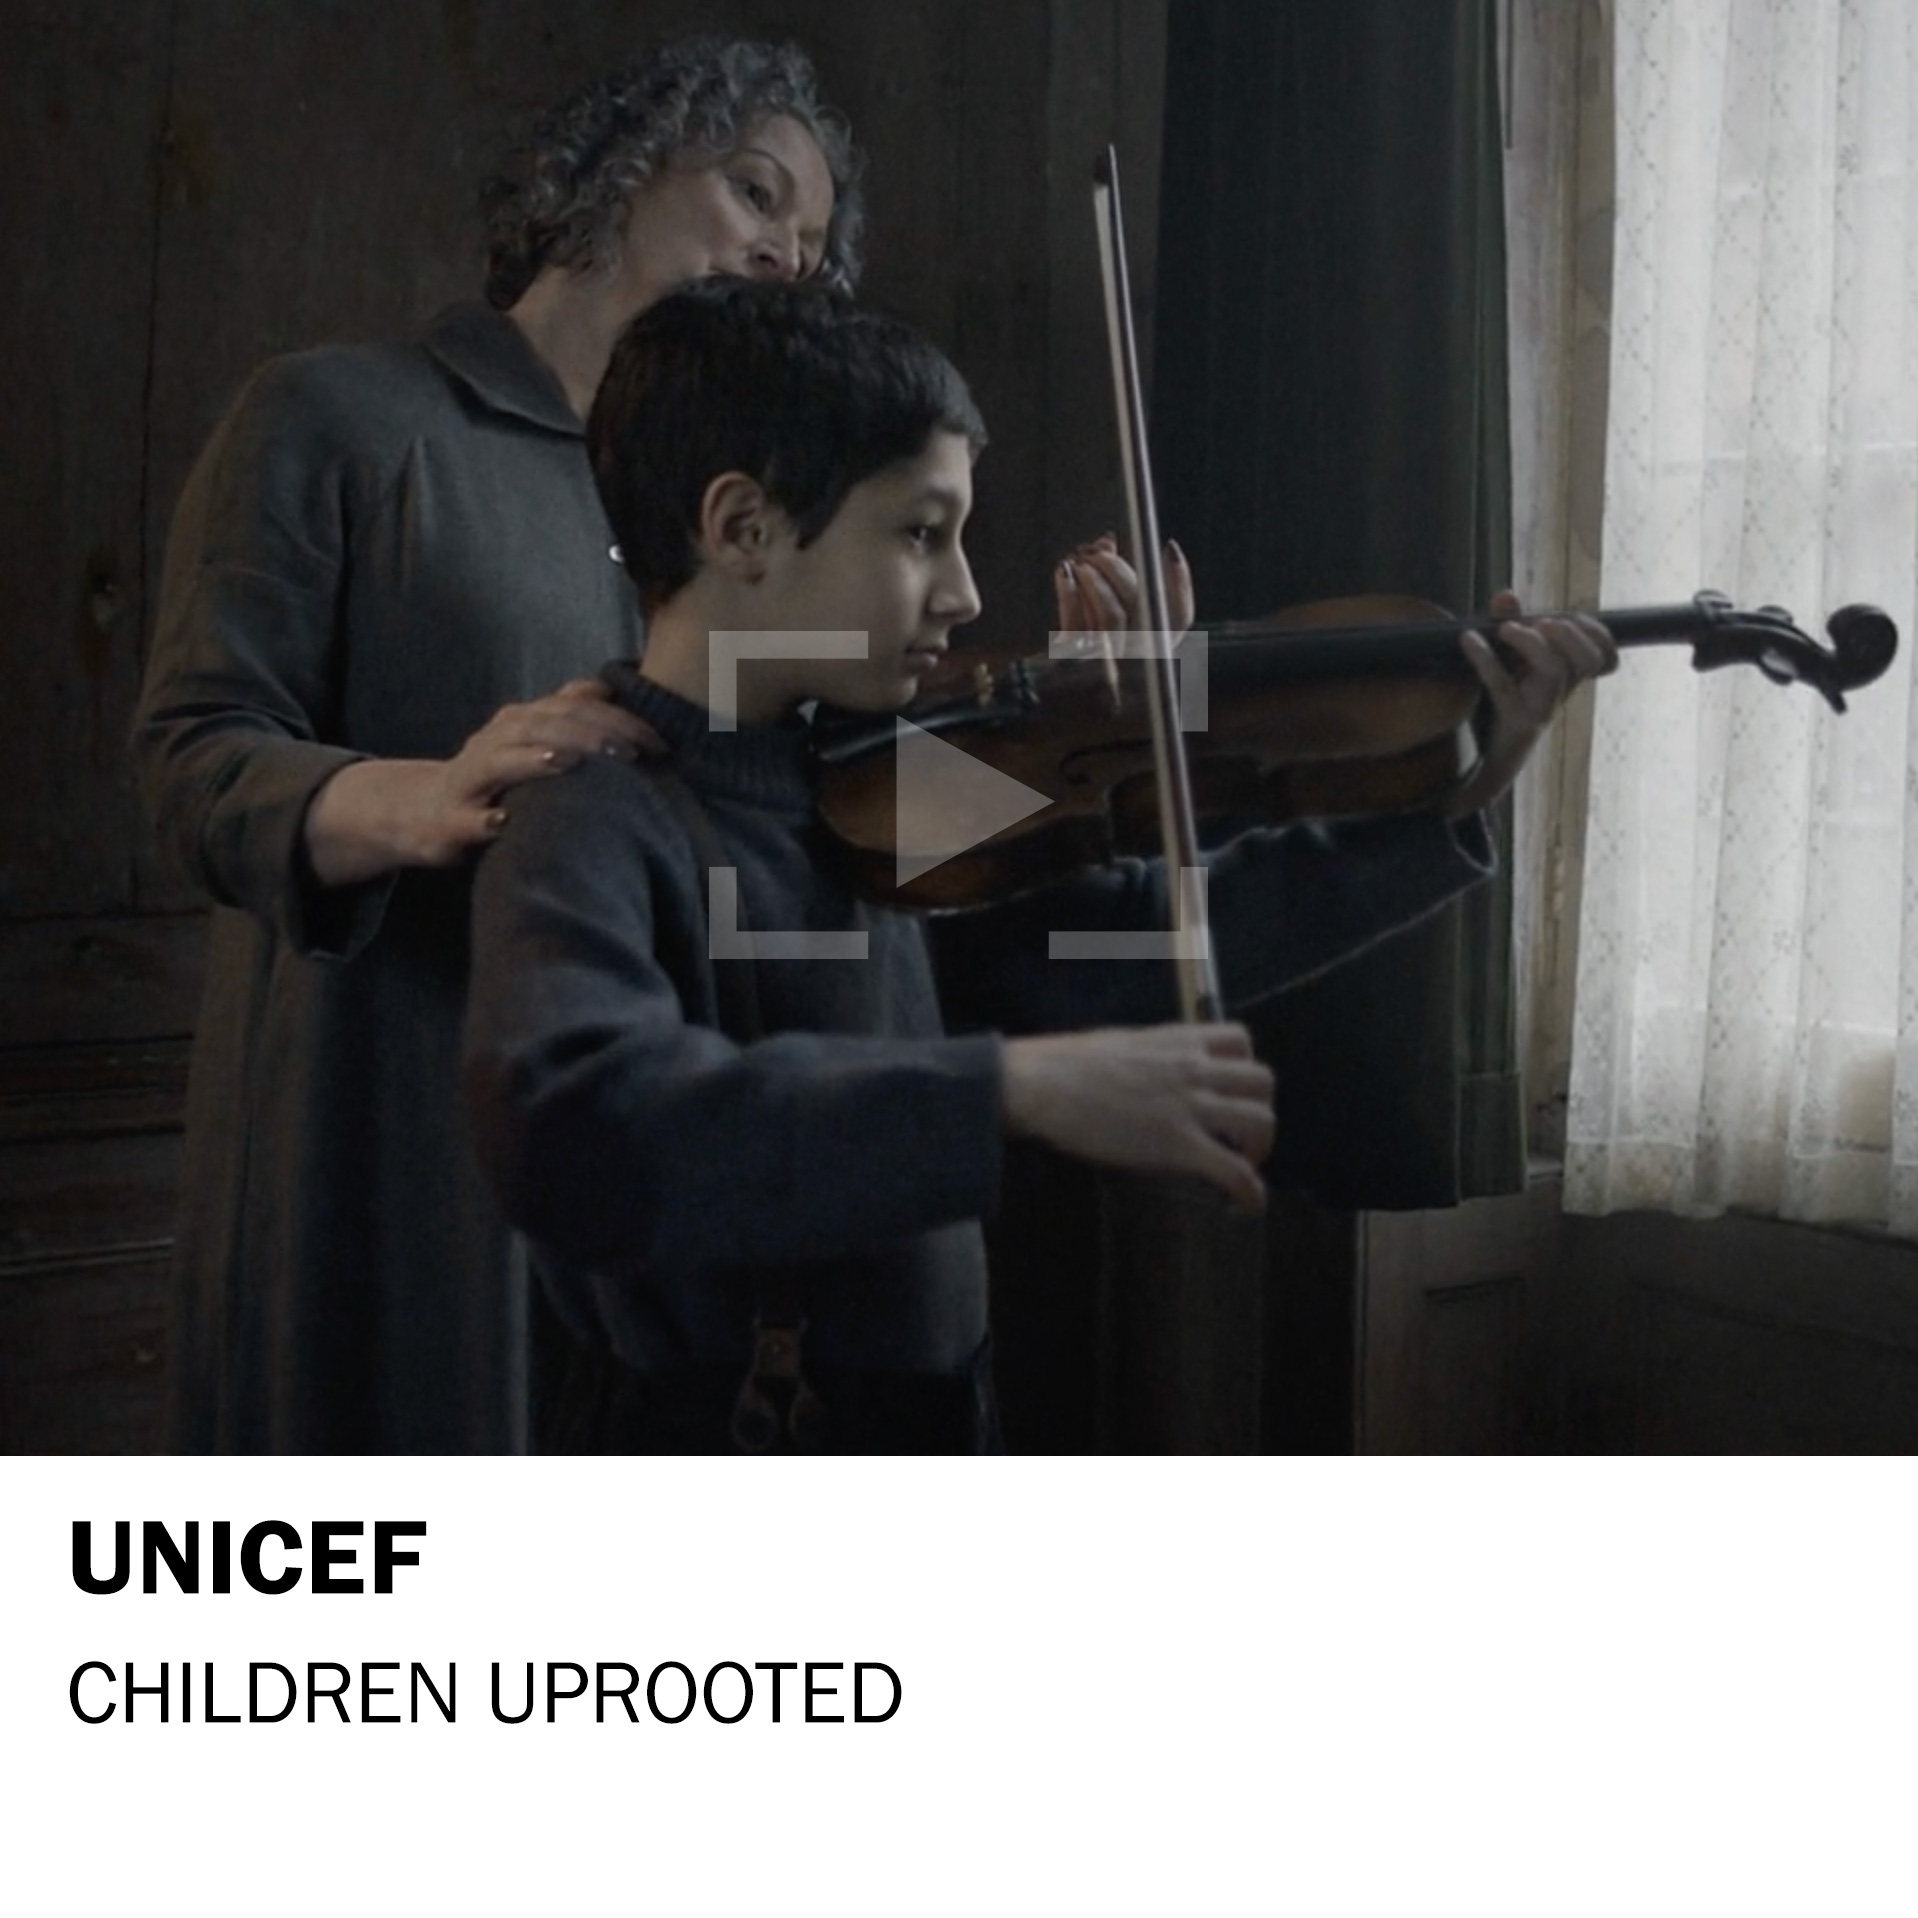 UNICEF – Children Uprooted